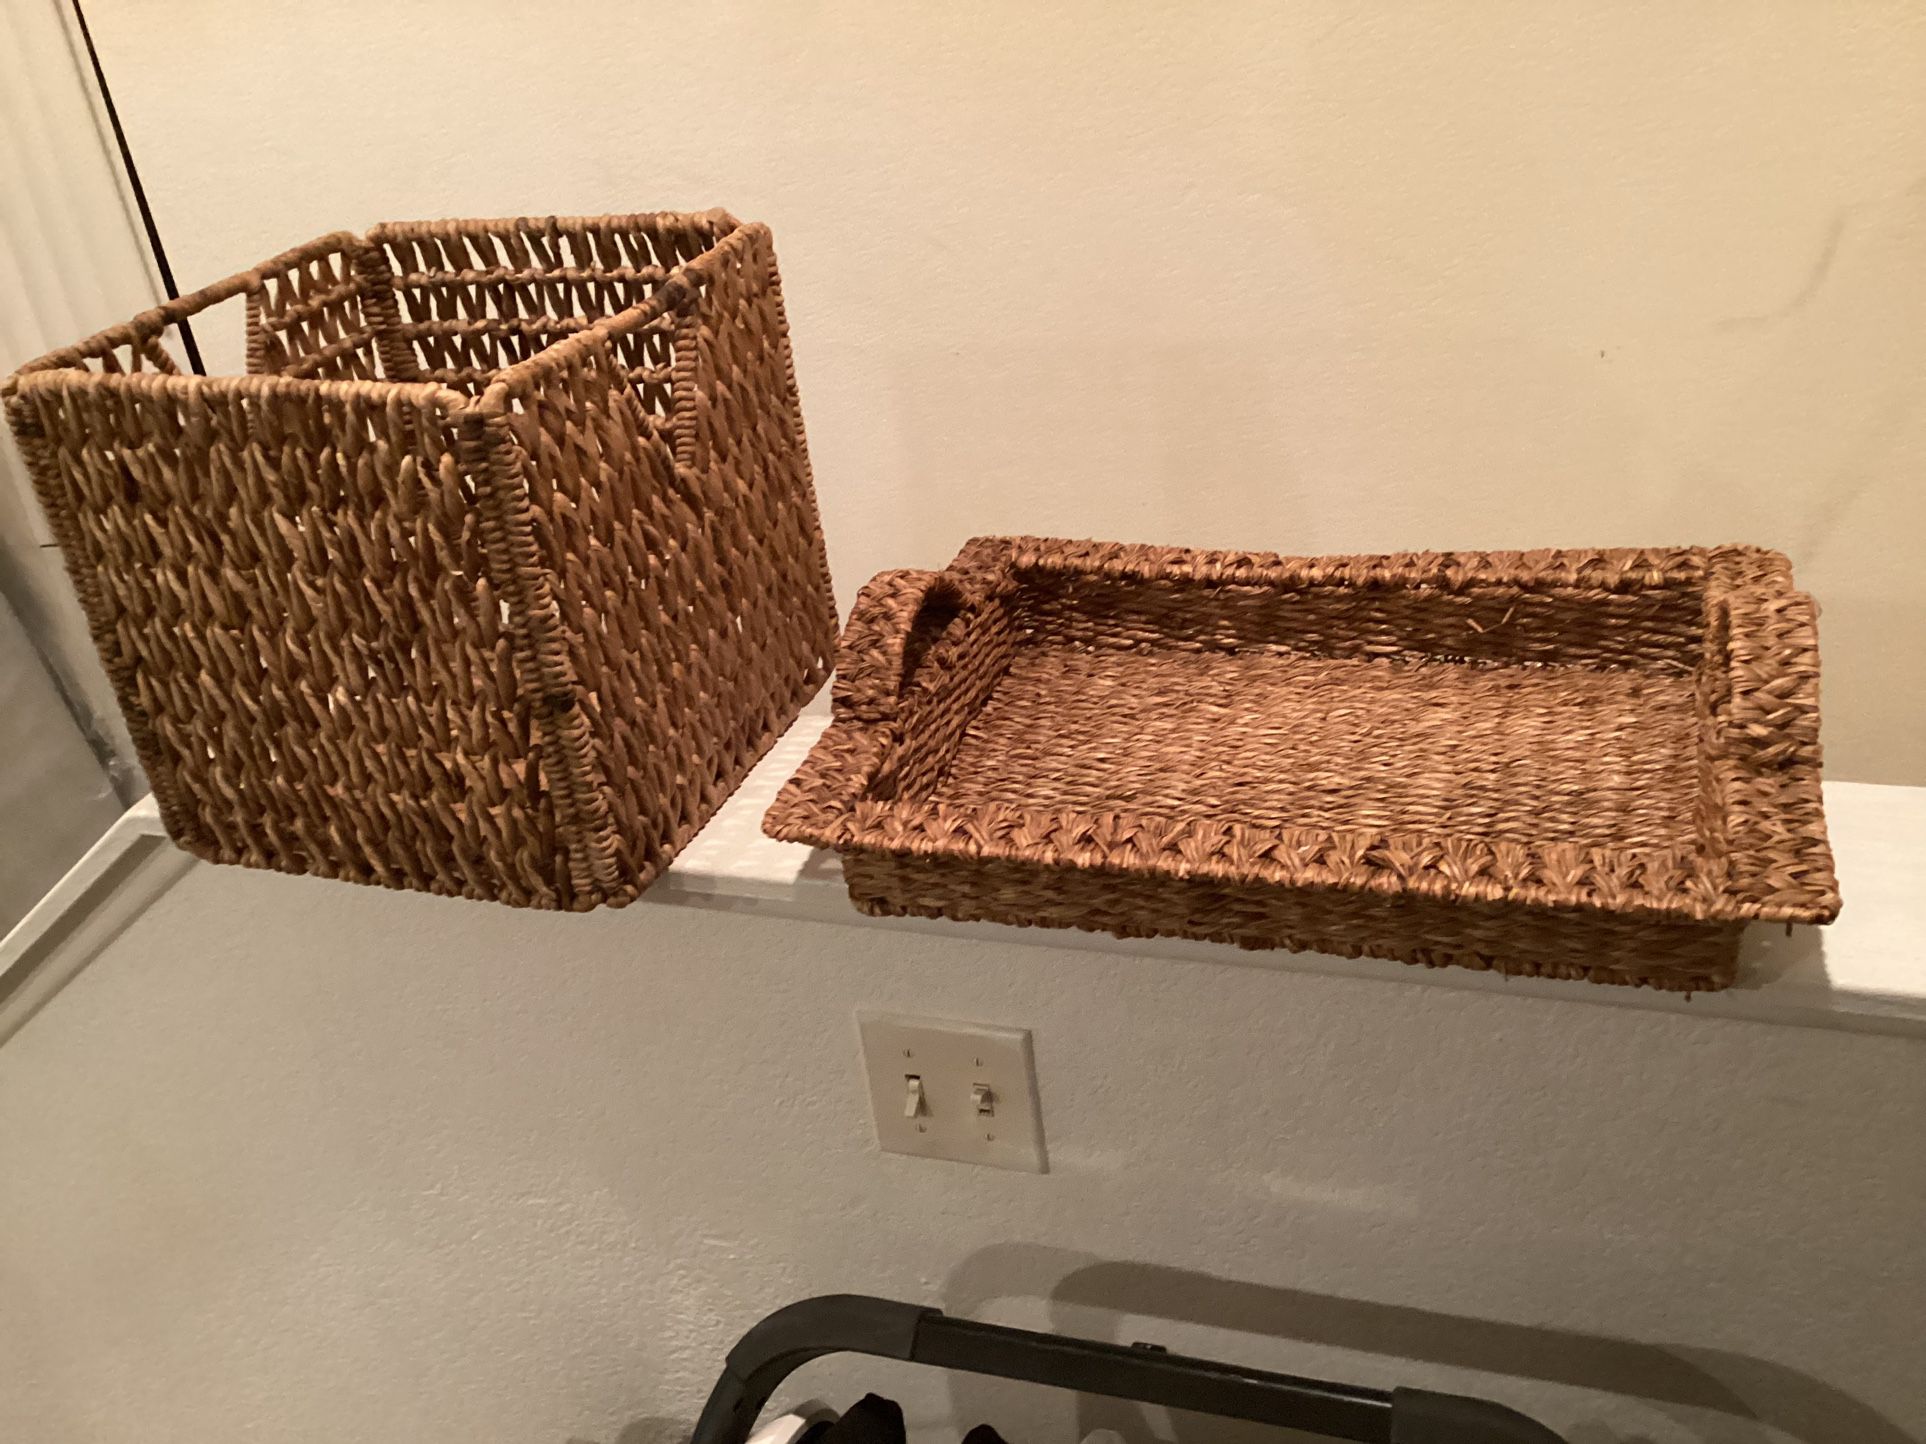 2 Baskets Like New Both For $30